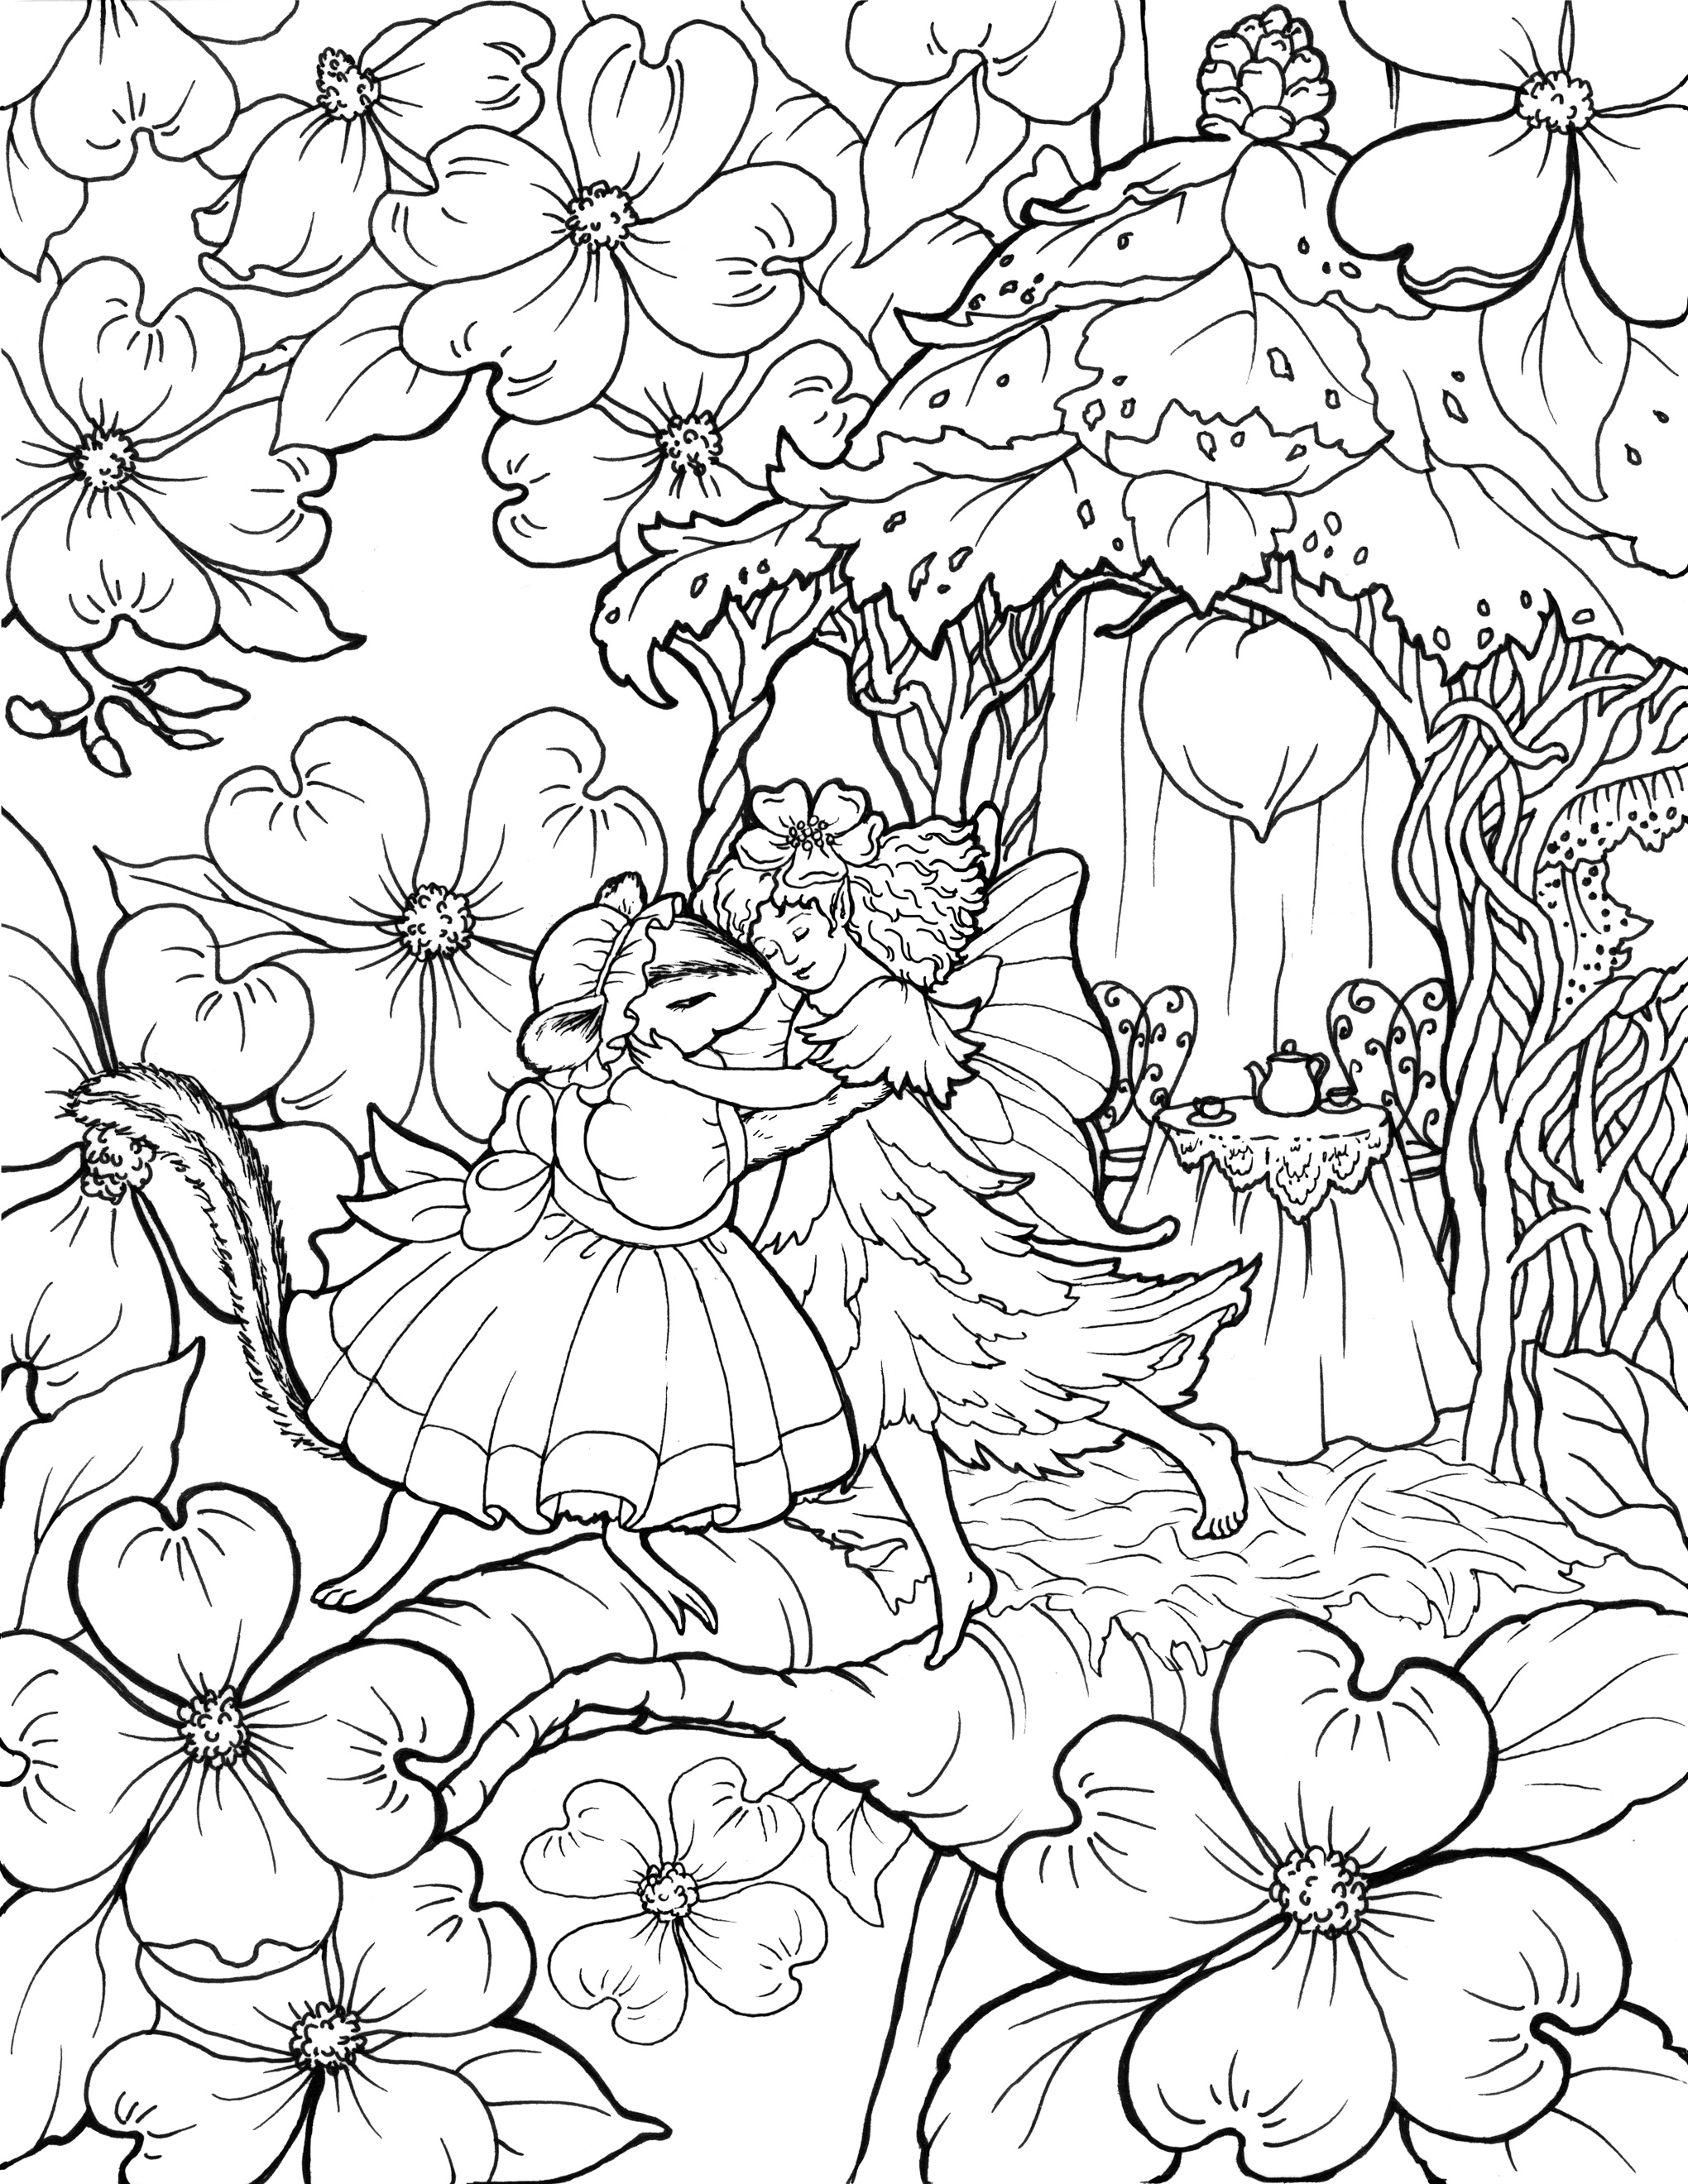 Fairy Adult Coloring Pages Spring Coloring Pages